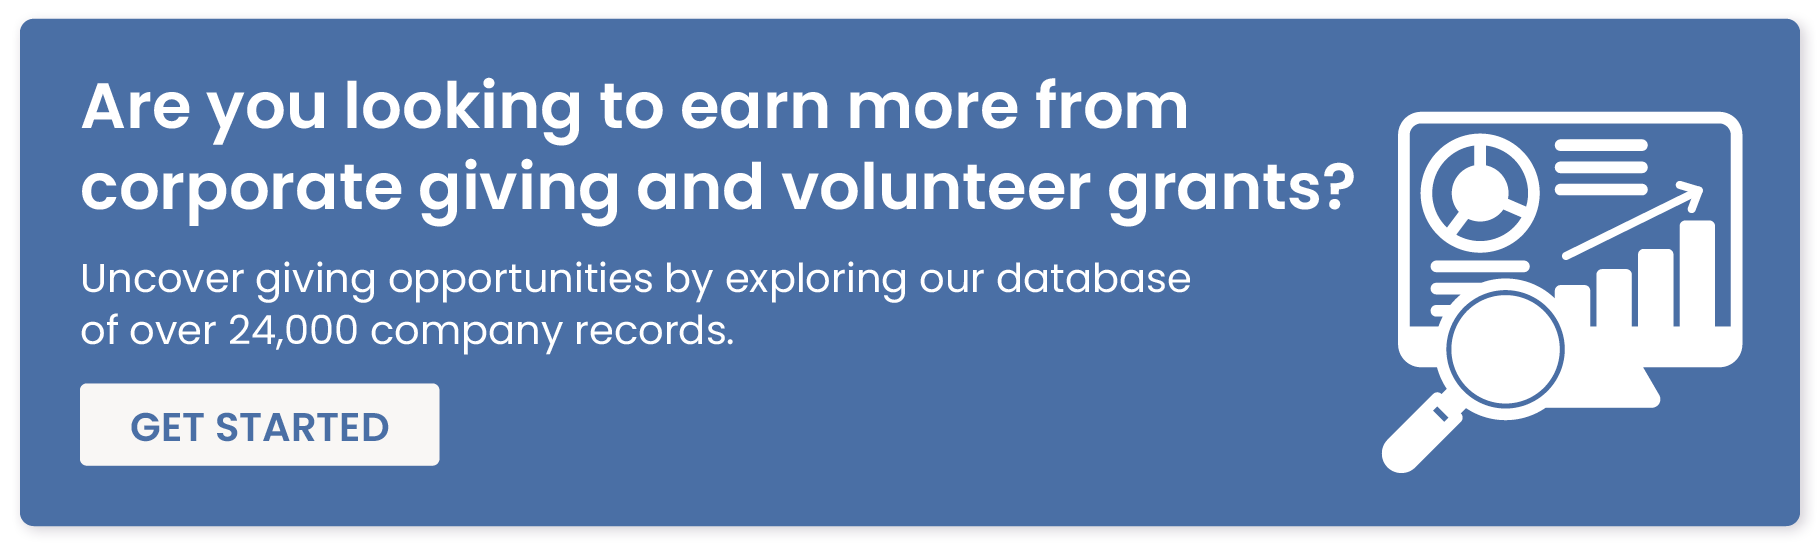 Are you looking to earn more from corporate giving and volunteer grants? Unveil giving opportunities by exploring our database of over 24,000 company records. Get started here. 